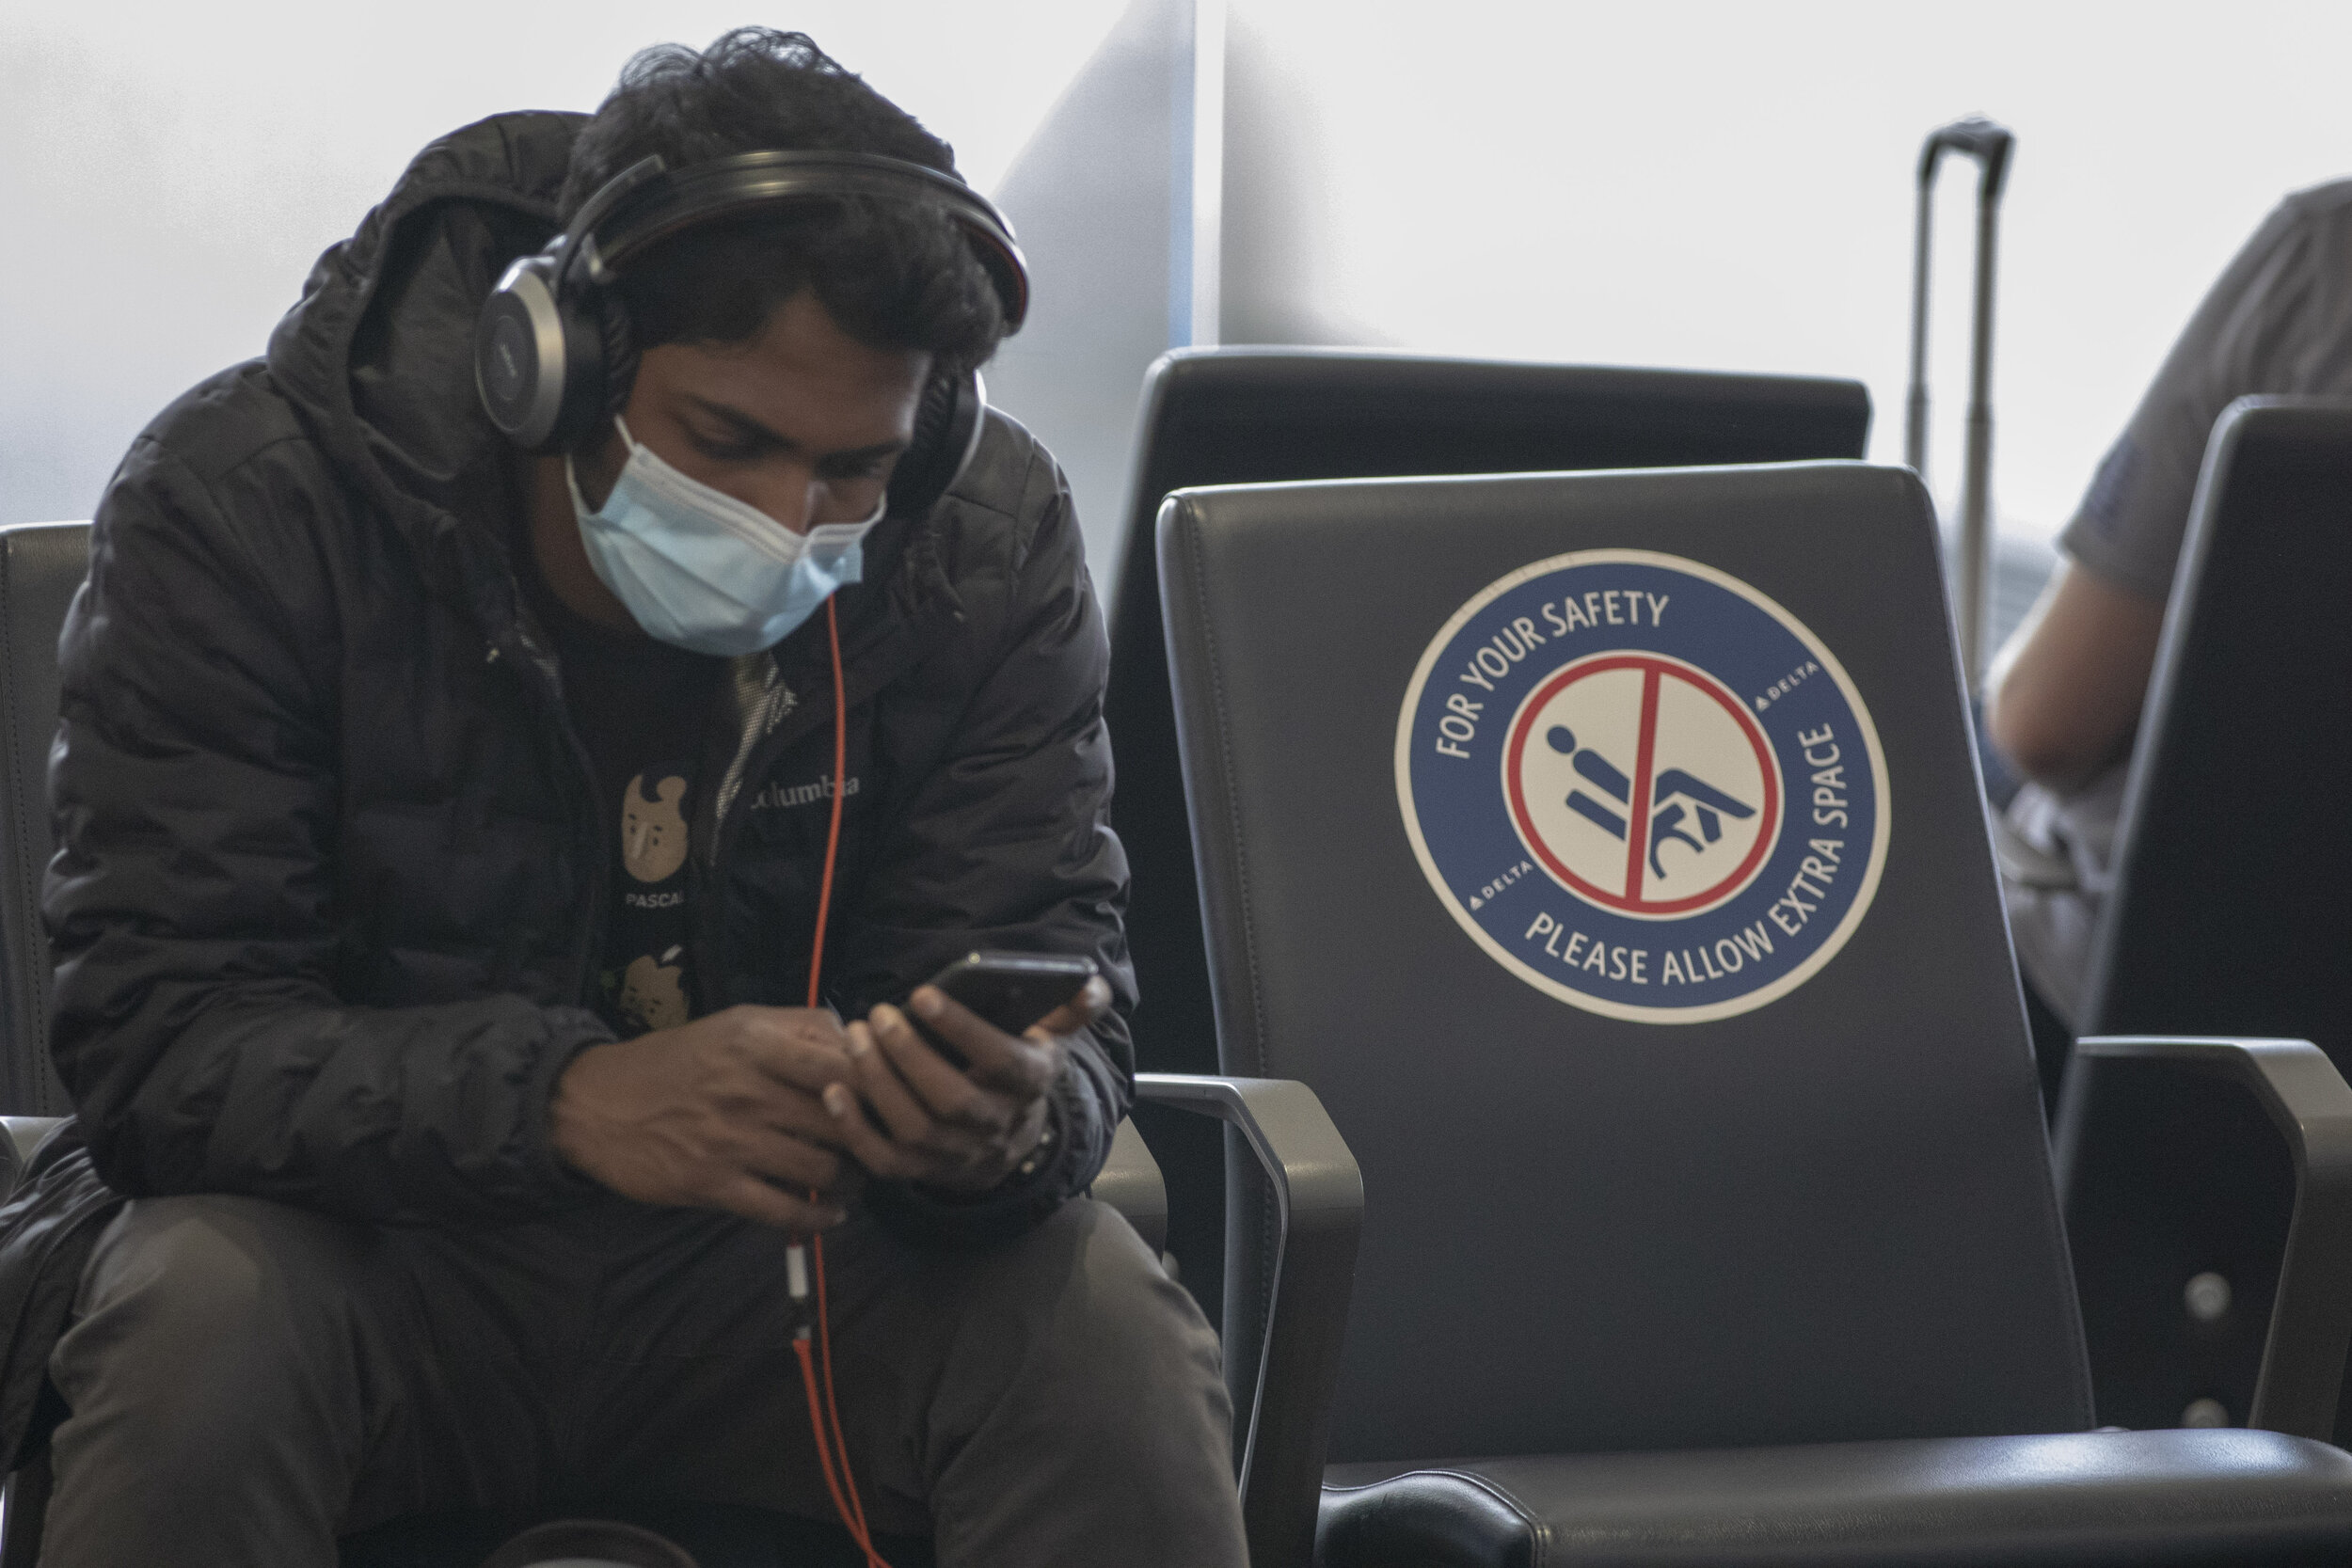  An unknown traveler sits with extra room thanks to a sign that prevents people from sitting next to each other at Los Angeles International Airport Terminal 2 on Thursday 25, 2021 in Los Angeles, Calf. (The Corsair I Brad Wilhite) 